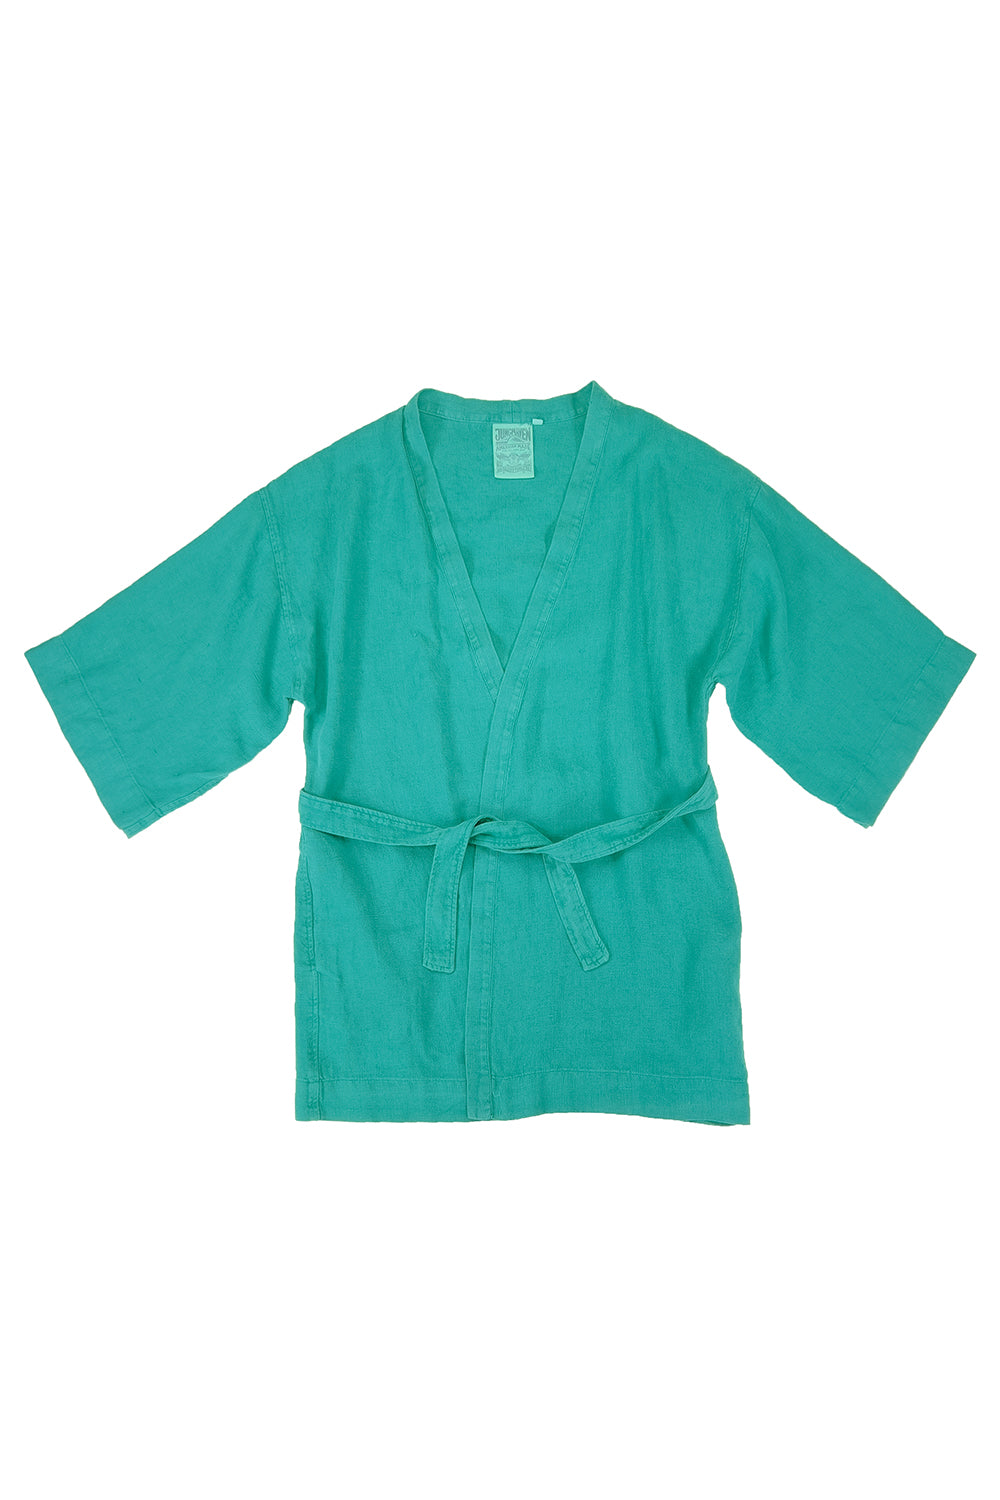 Bali Cover-up | Jungmaven Hemp Clothing & Accessories / Color: Ivy Green